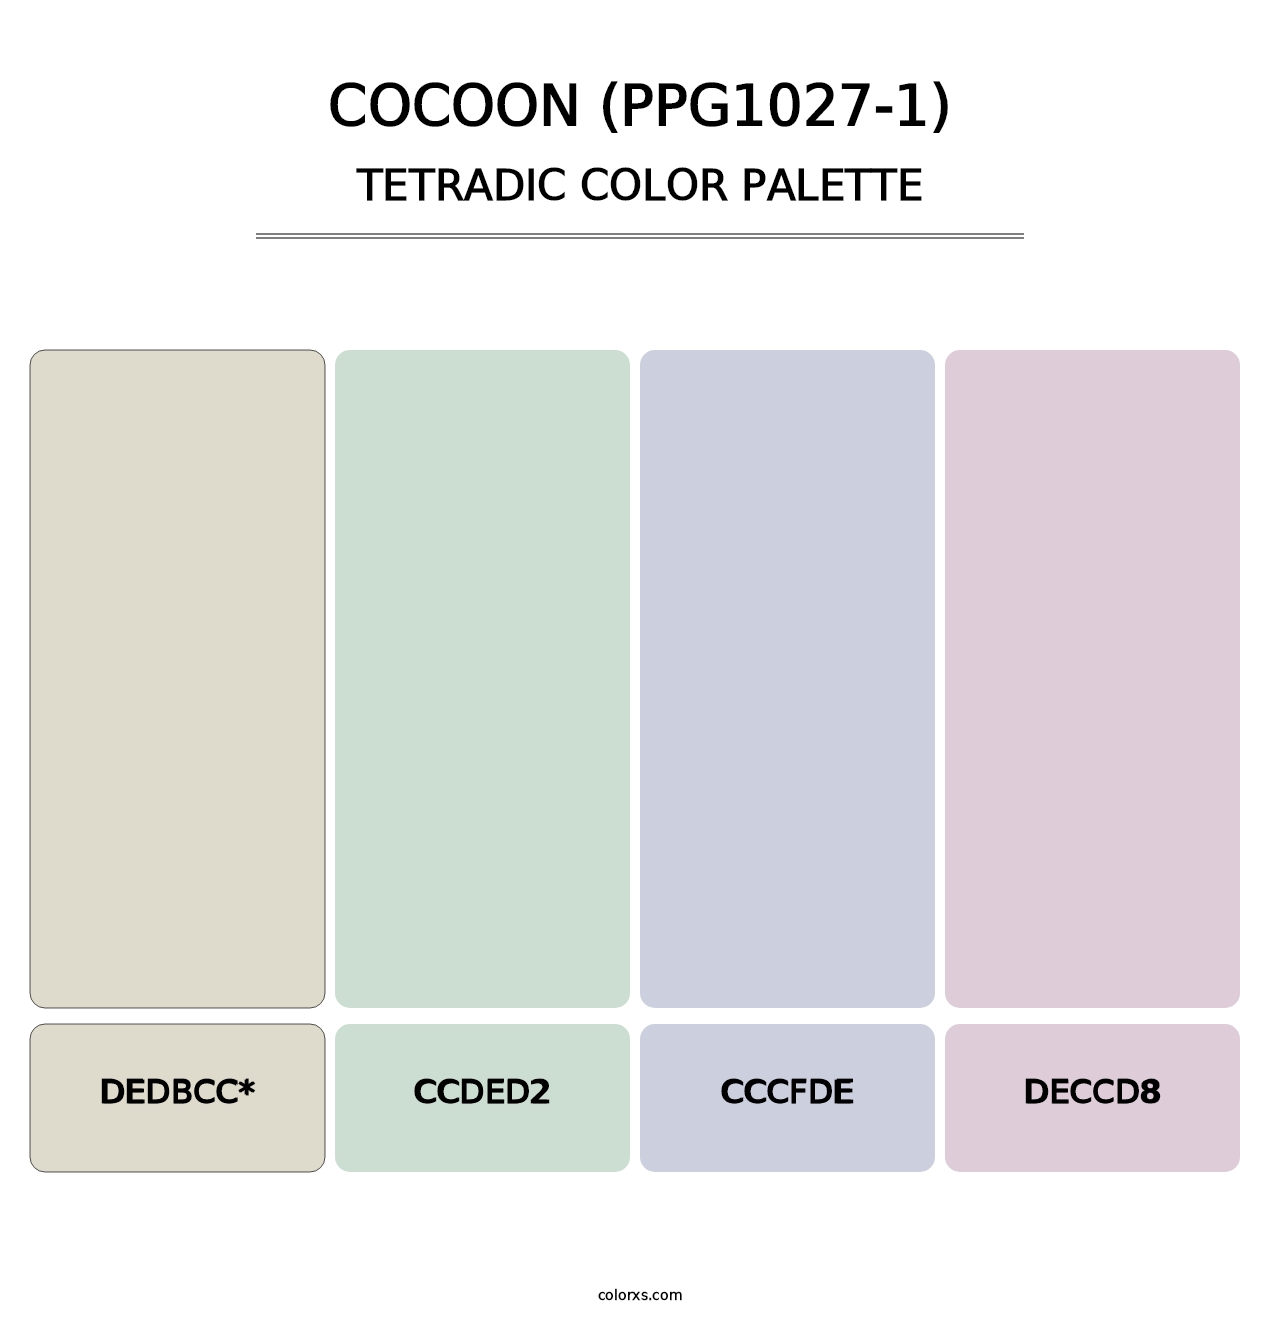 Cocoon (PPG1027-1) - Tetradic Color Palette